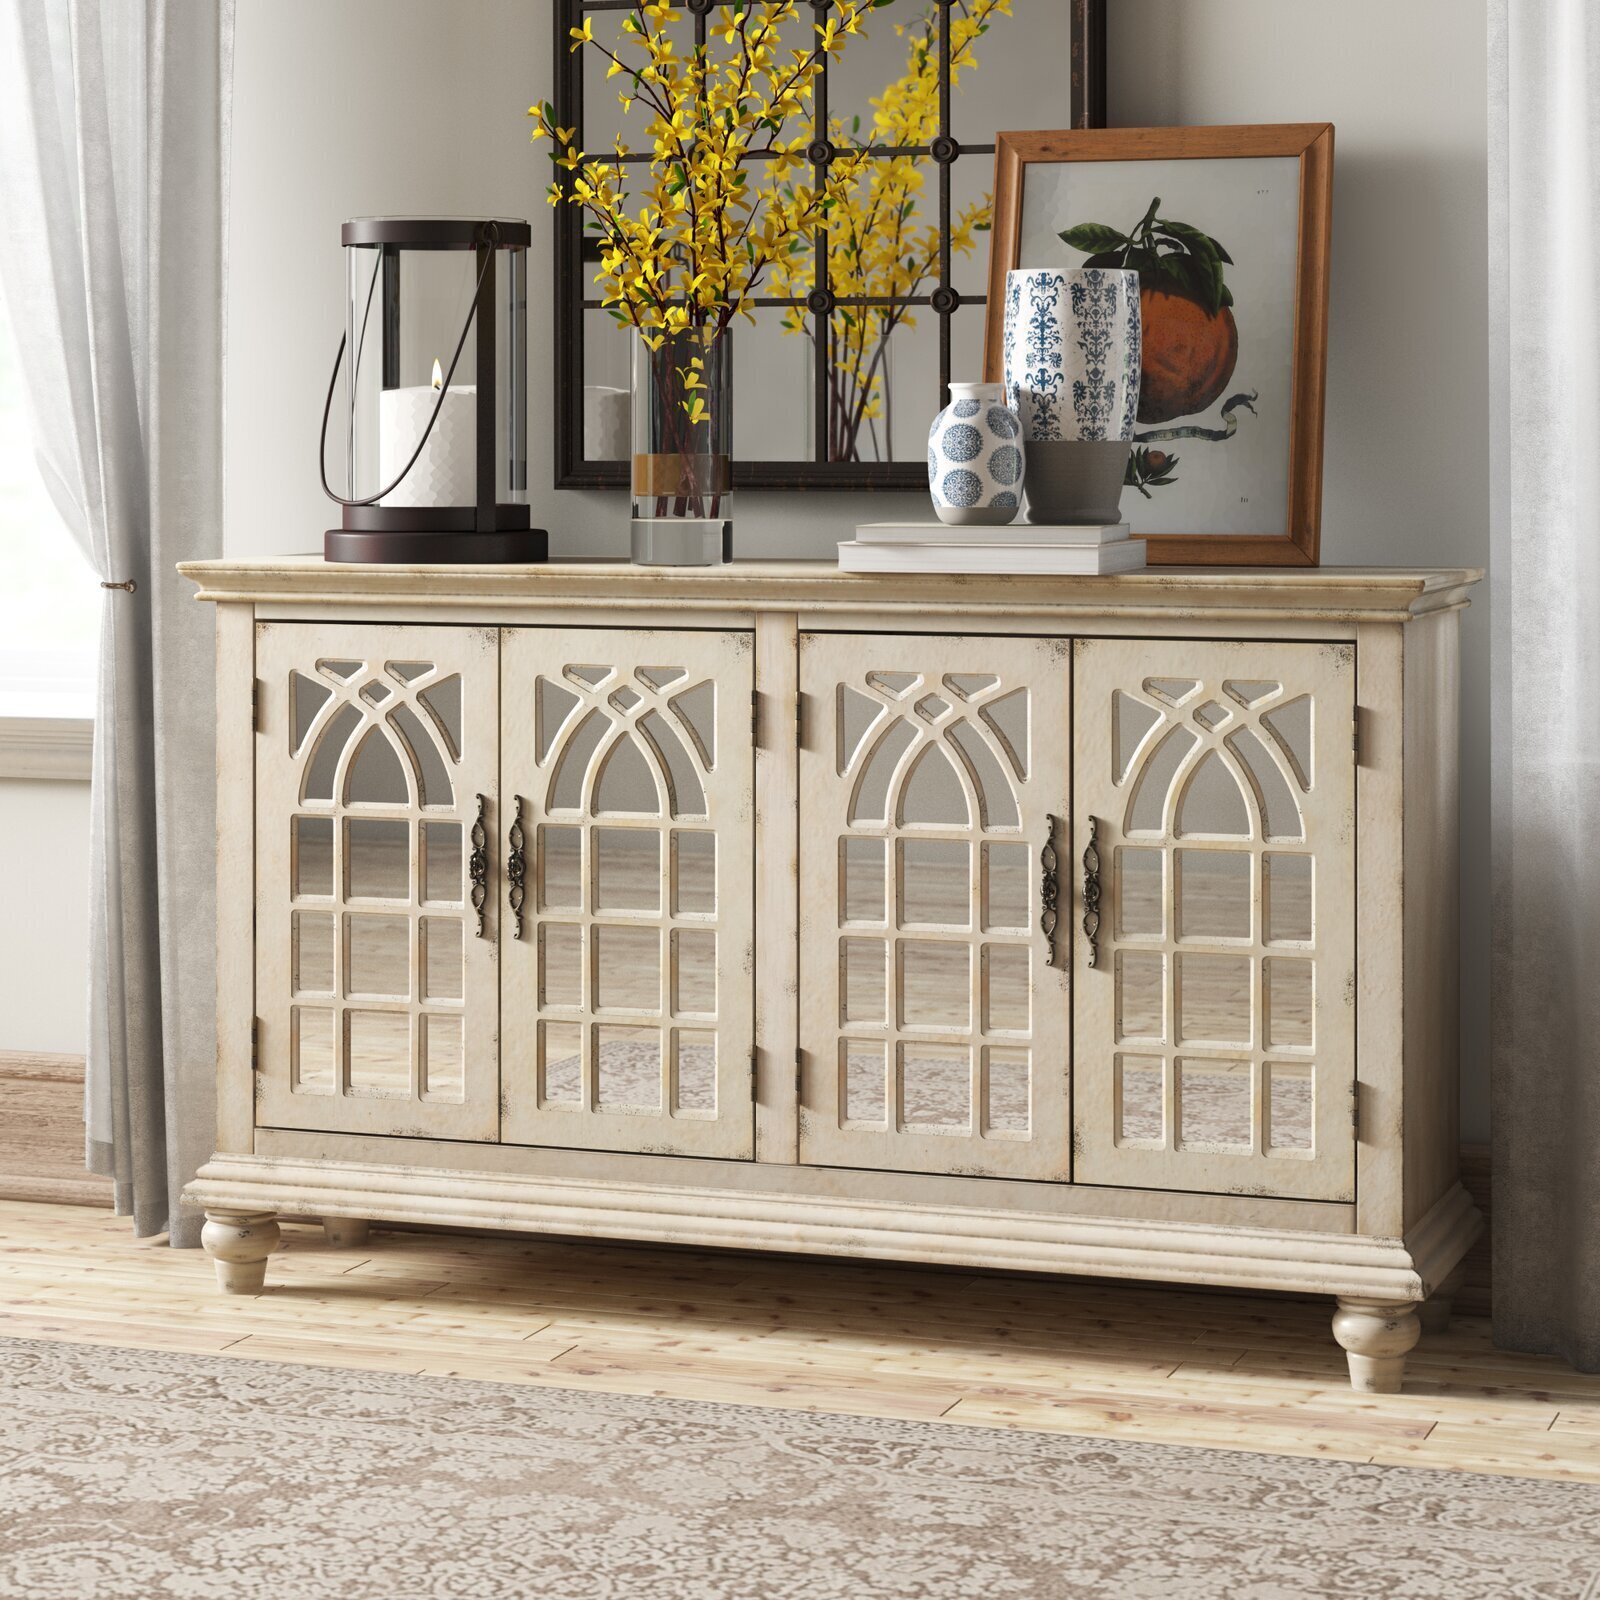 Distressed sideboard with decorative doors